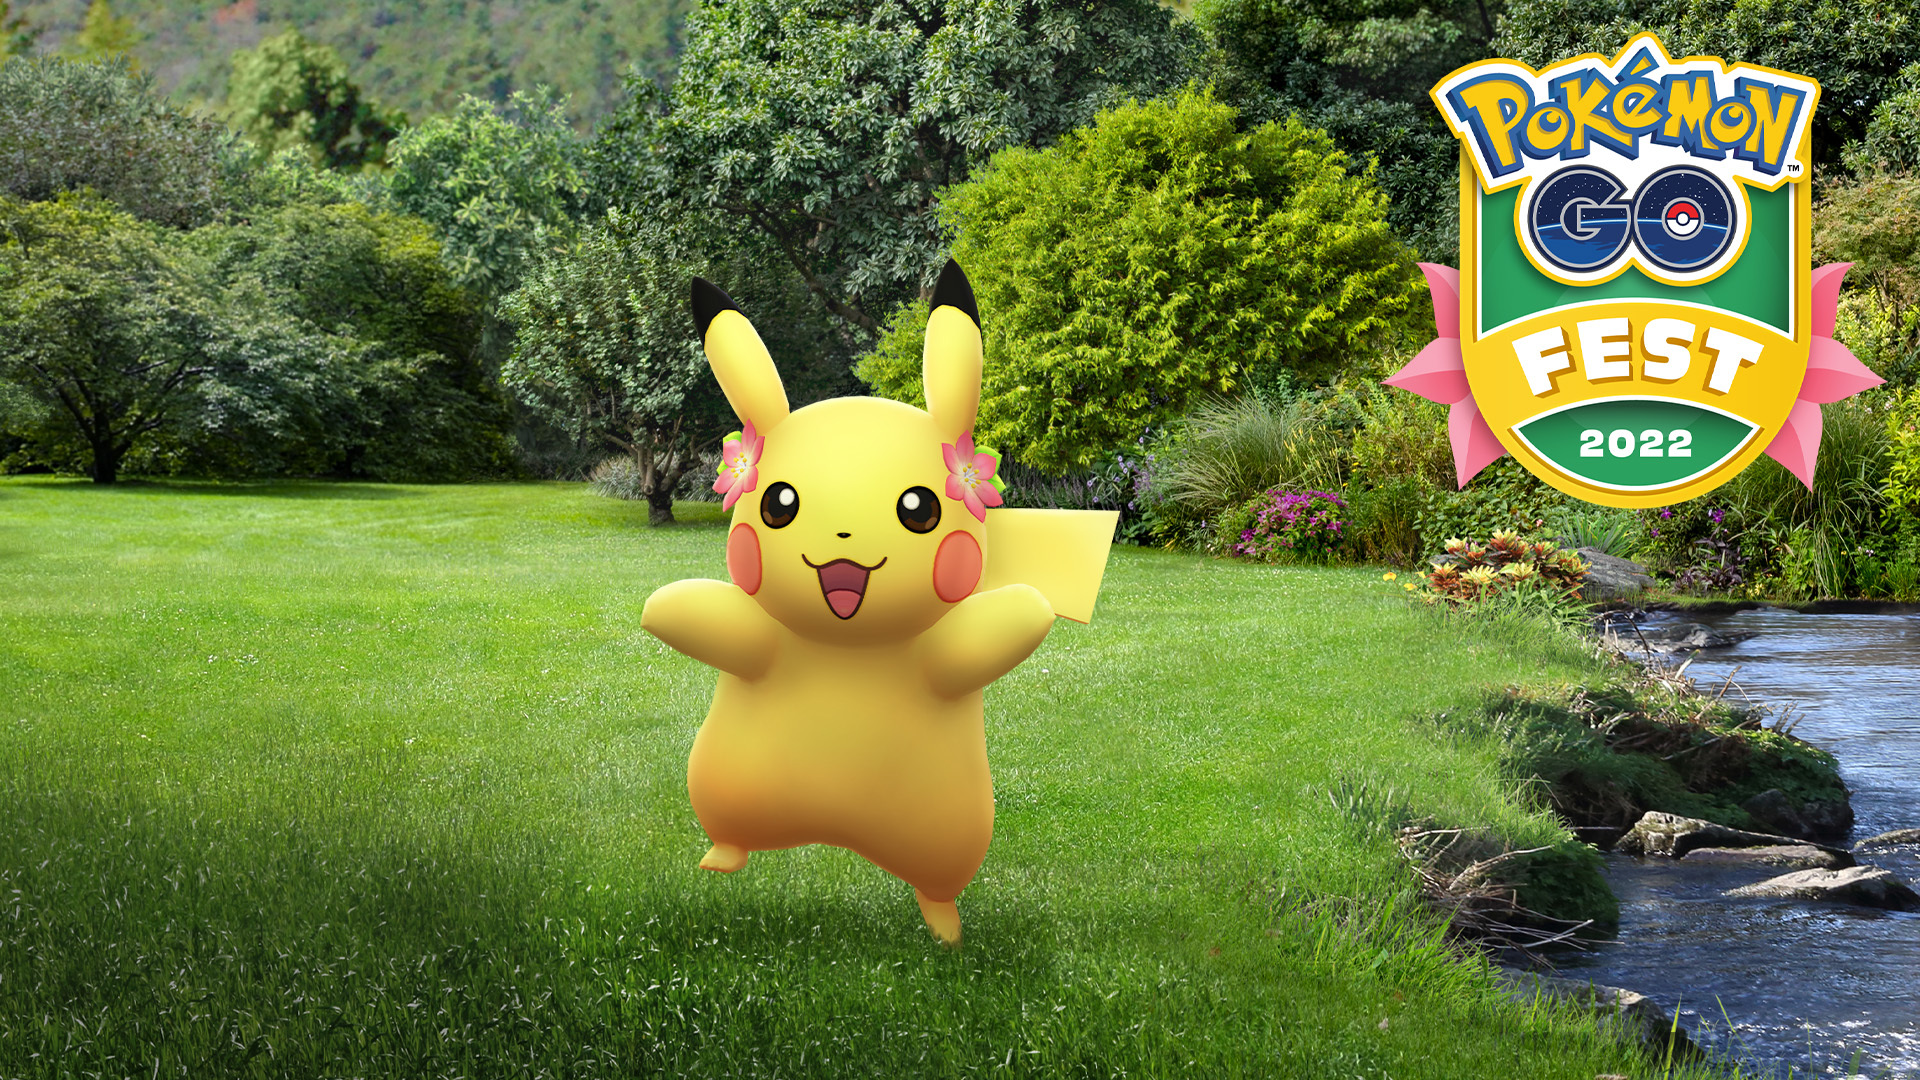 Pokémon GO on X: In celebration of #PokemonGOFest2022 and Shaymin's debut  in Pokémon GO, a Pikachu wearing a special Shaymin-inspired Gracidea flower  costume is appearing! 🌺 You can encounter it in the